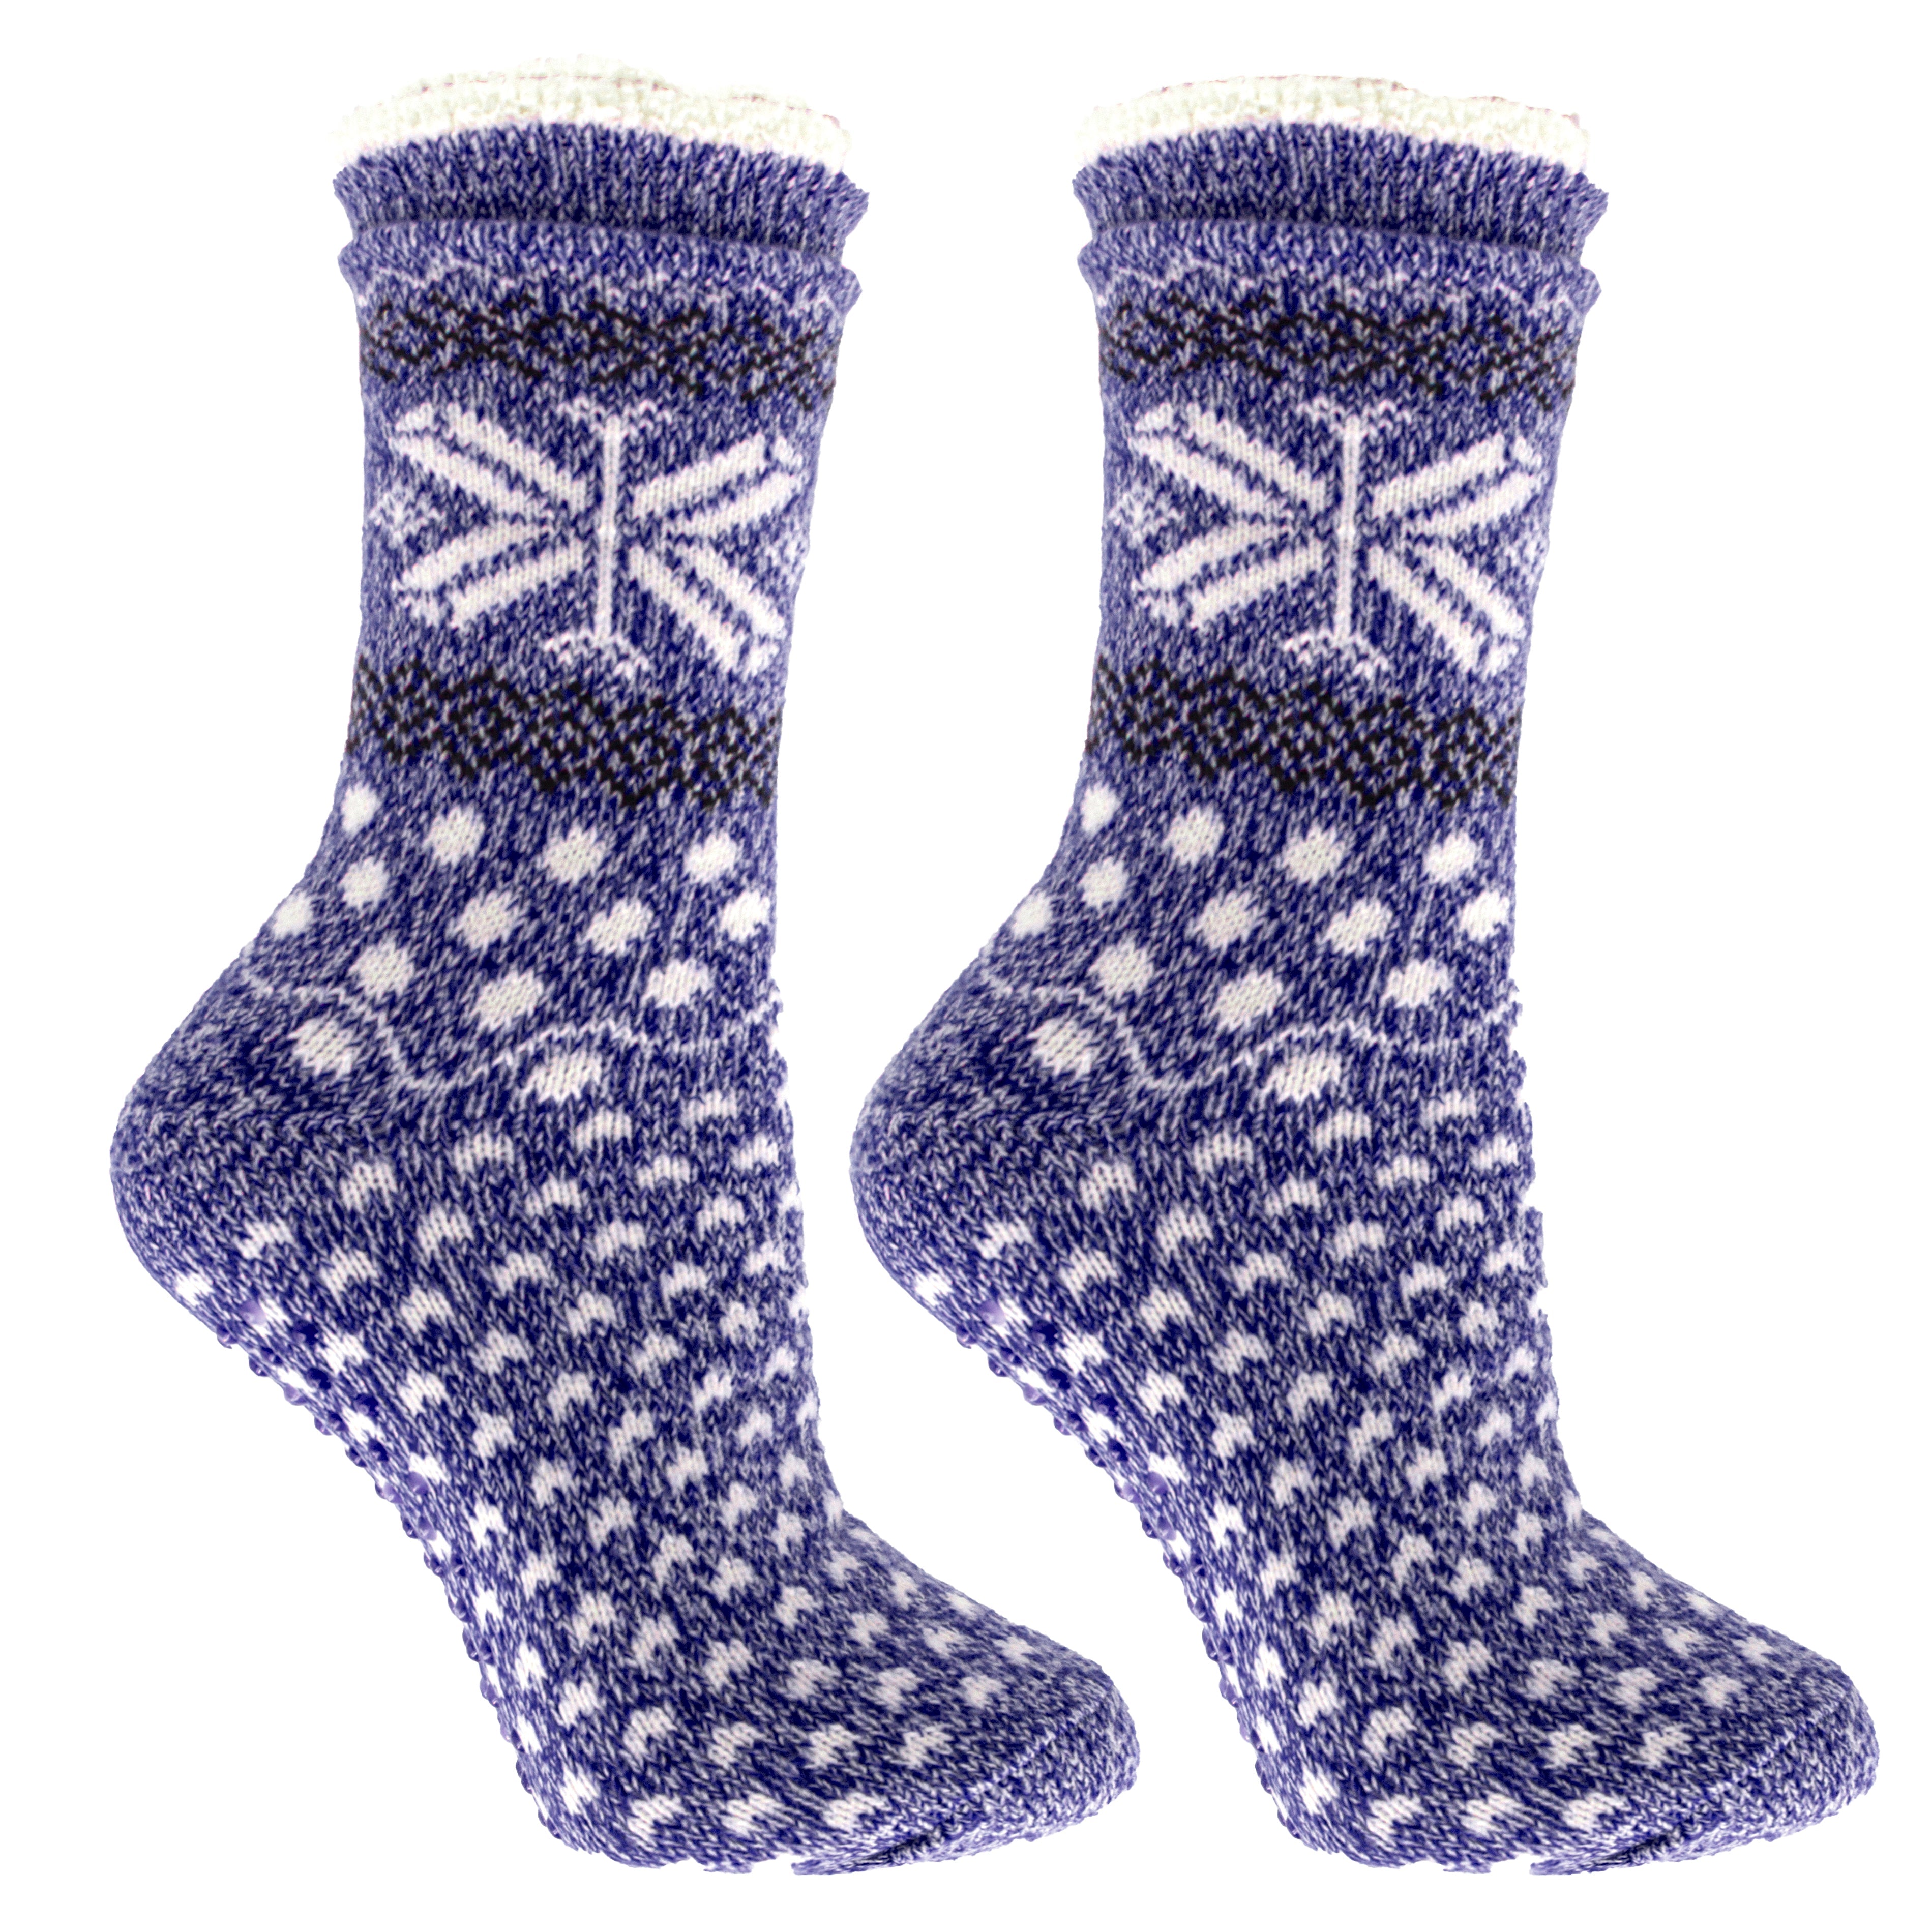 Double Layer Non-Skid Warm Soft and Fuzzy Slipper Socks With Lavender